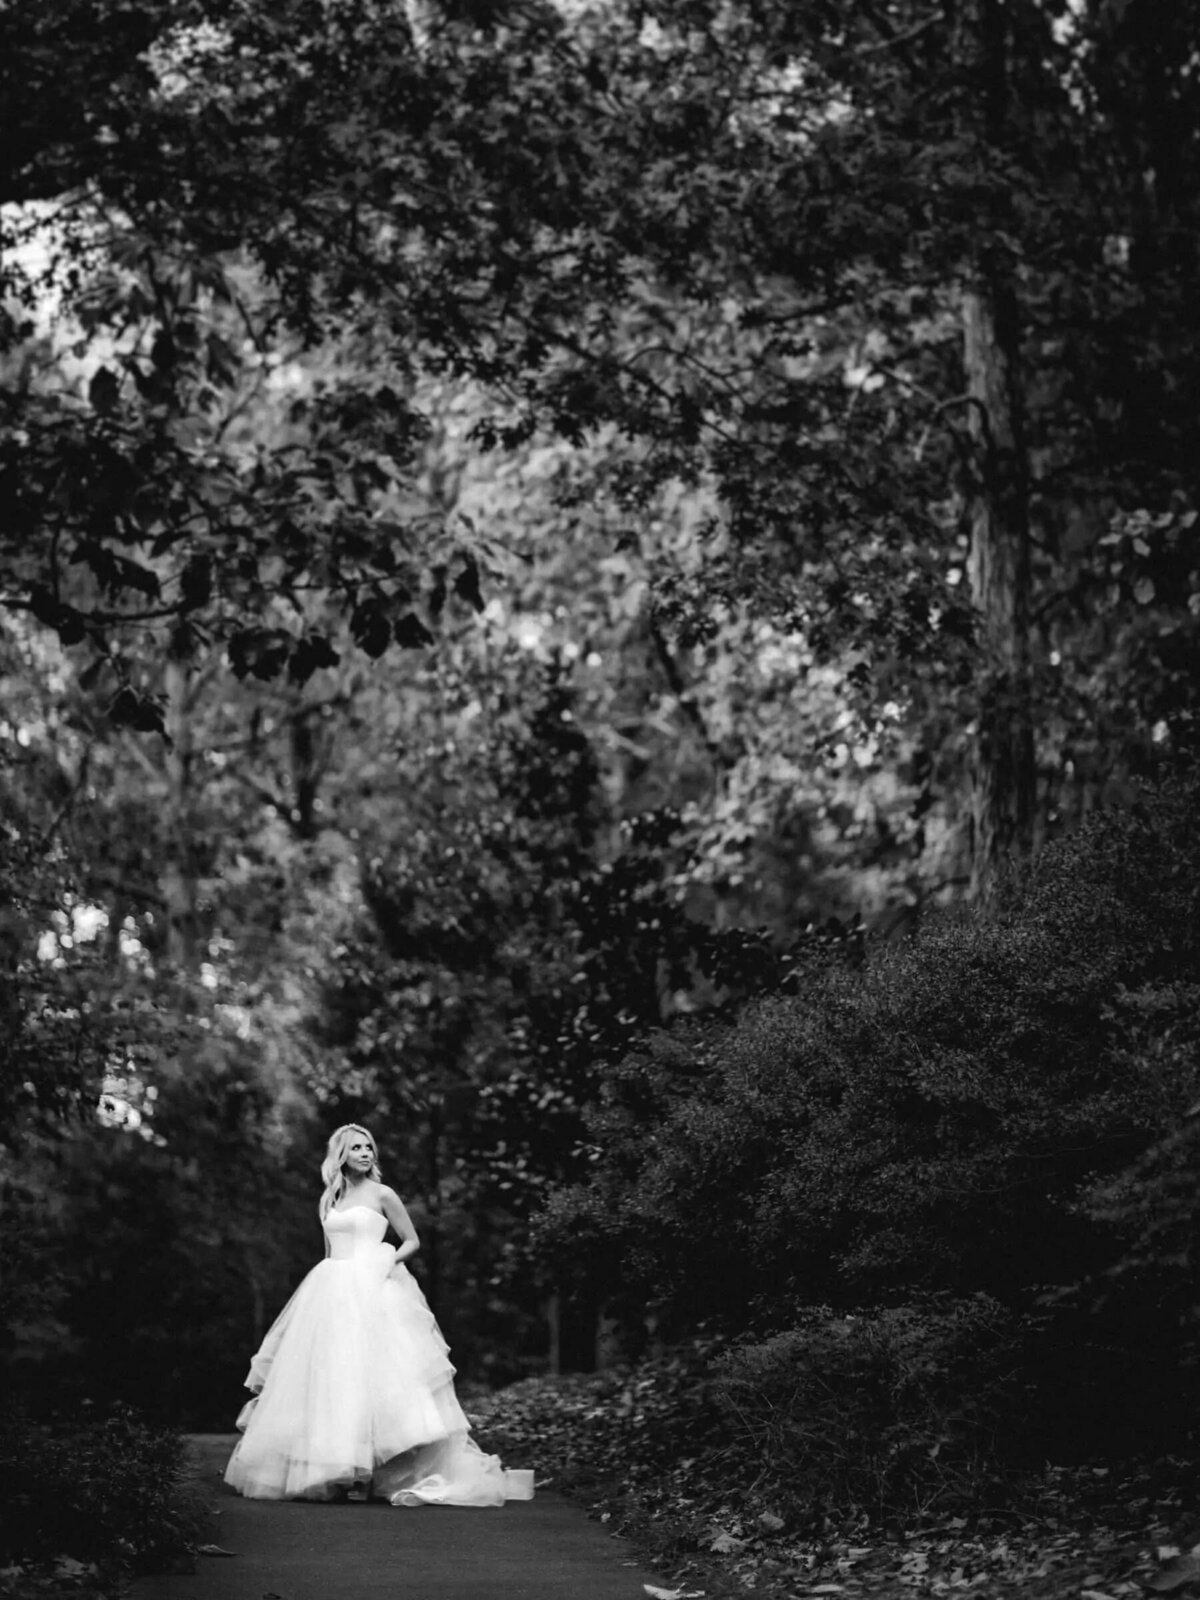 A bride standing on a path in a wooded area